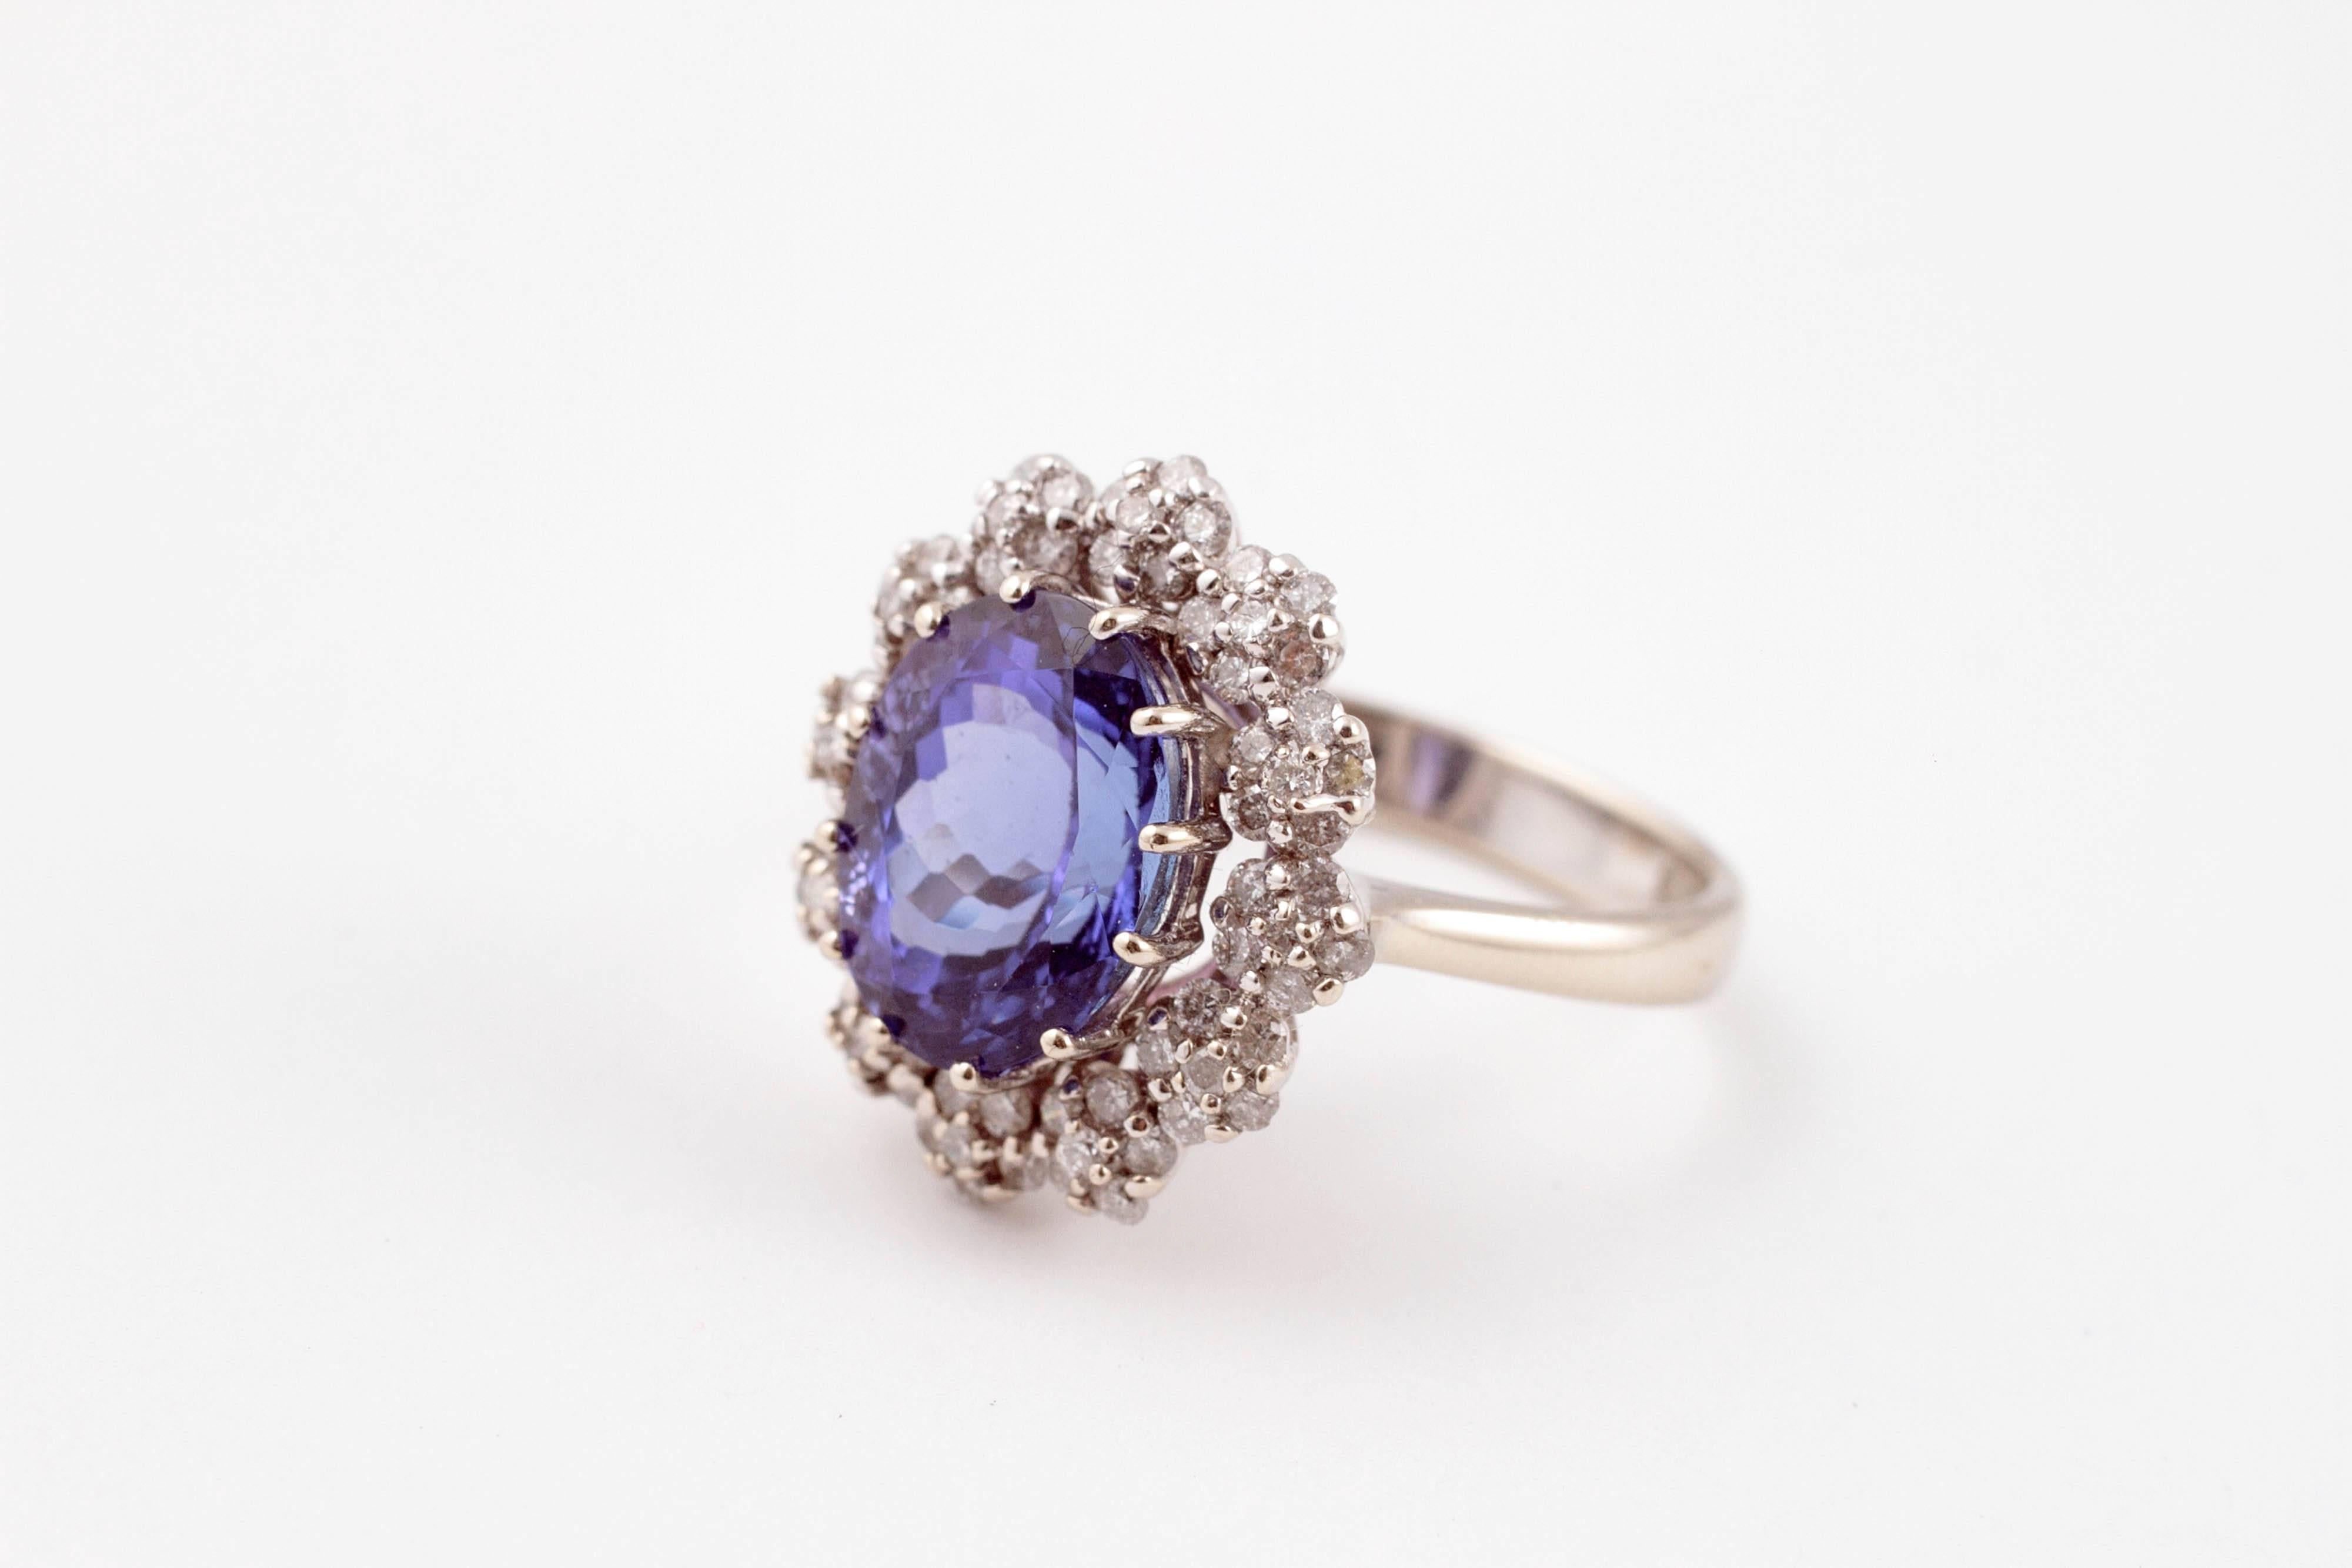 If you love violet - blue stones, this one is for you! In 14 karat white gold. Size 7